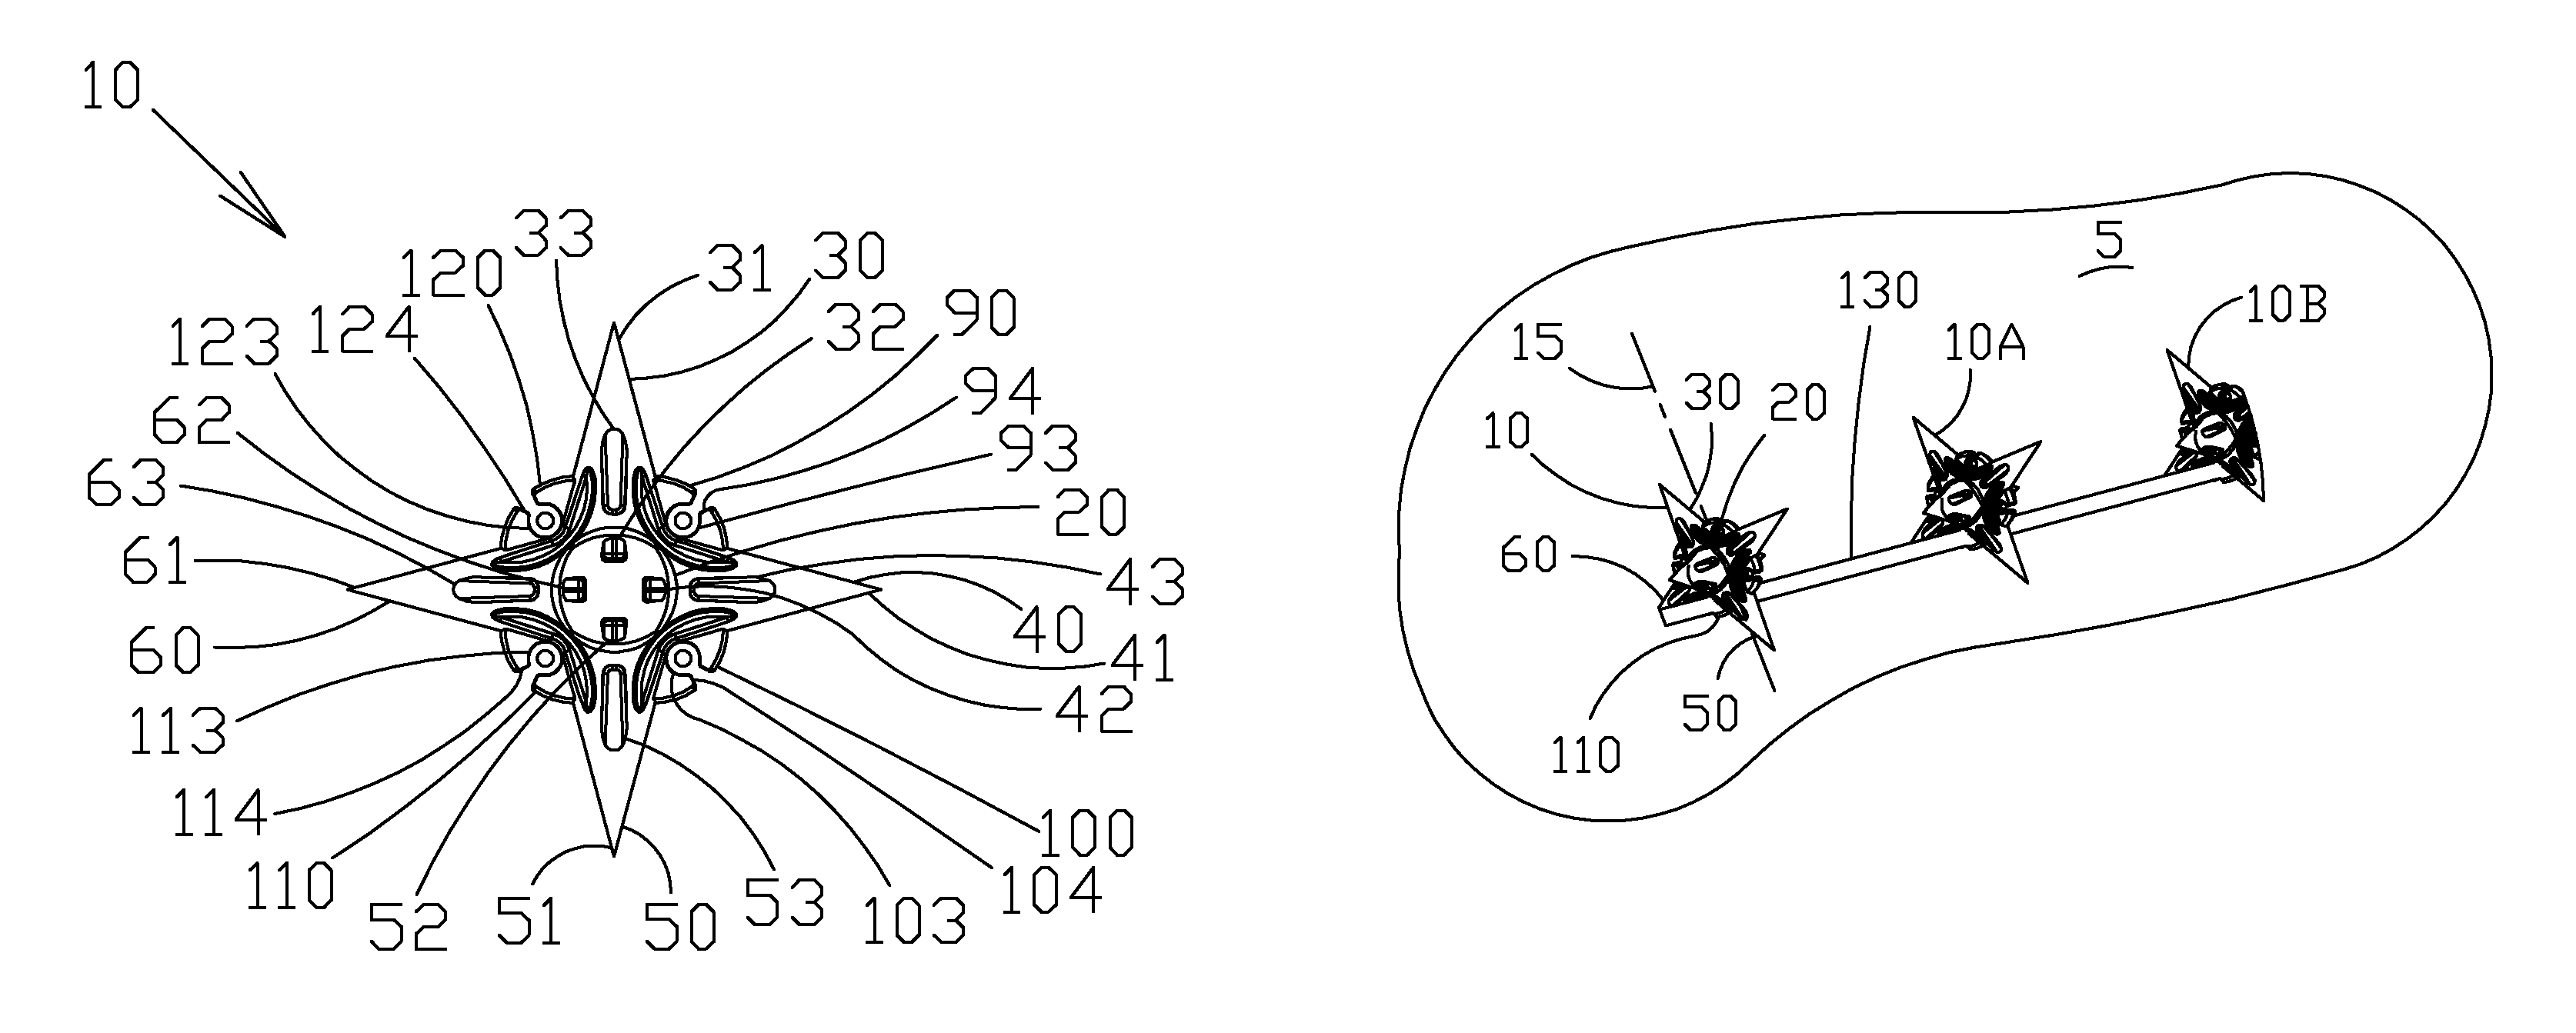 Road spikes with improved characteristics and methods of deployment